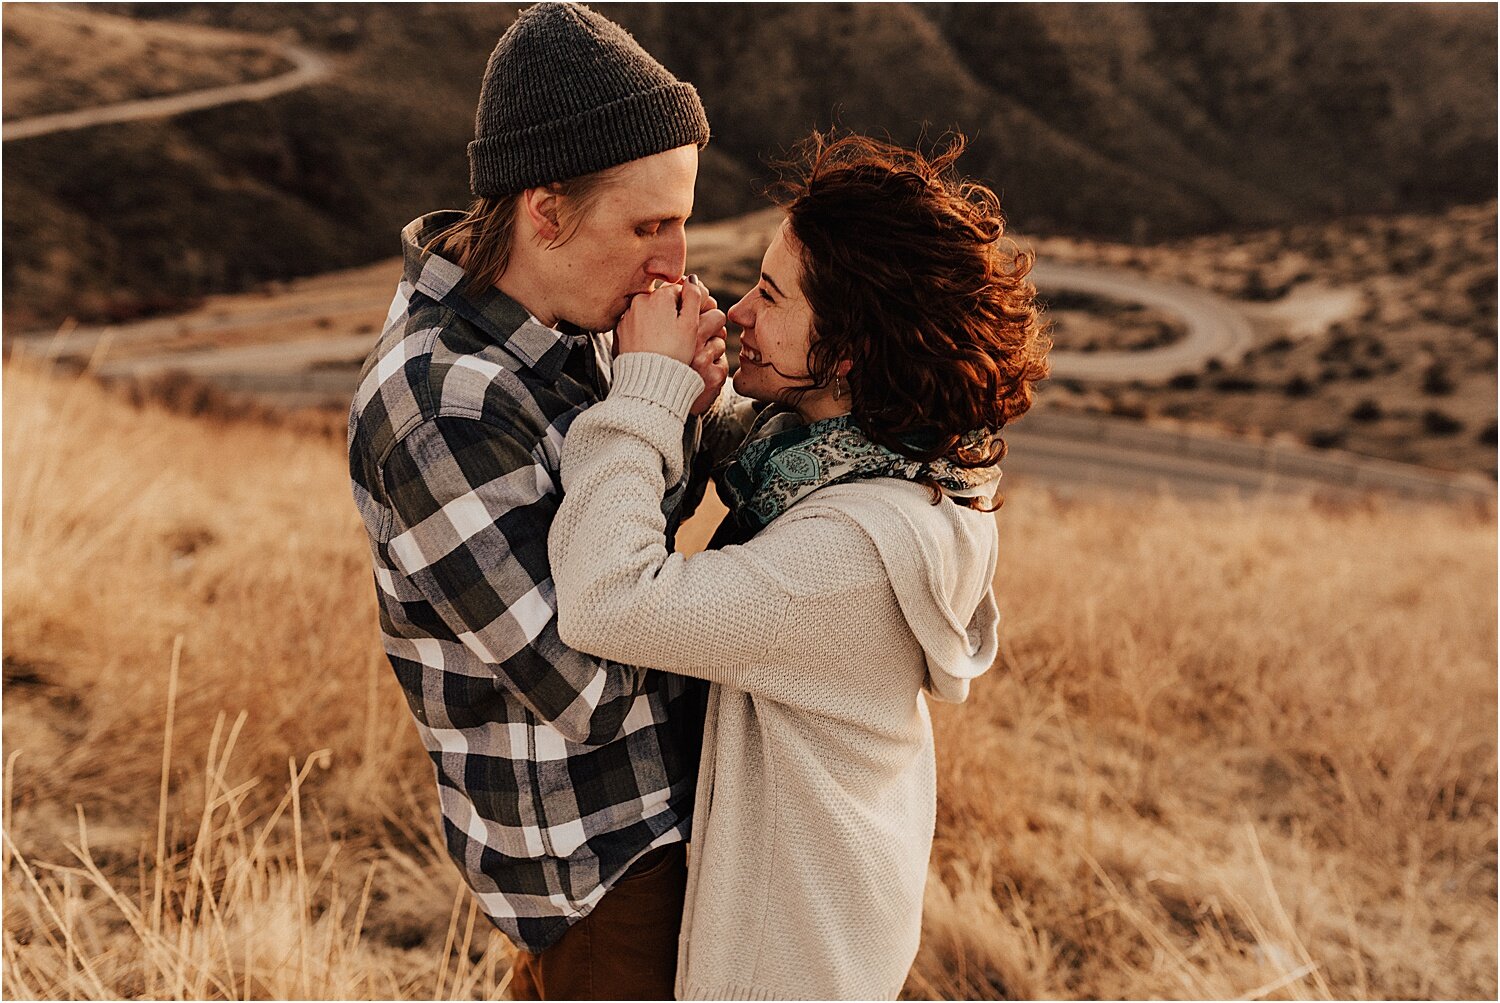 brewery foothills winter engagement session boise idaho25.jpg